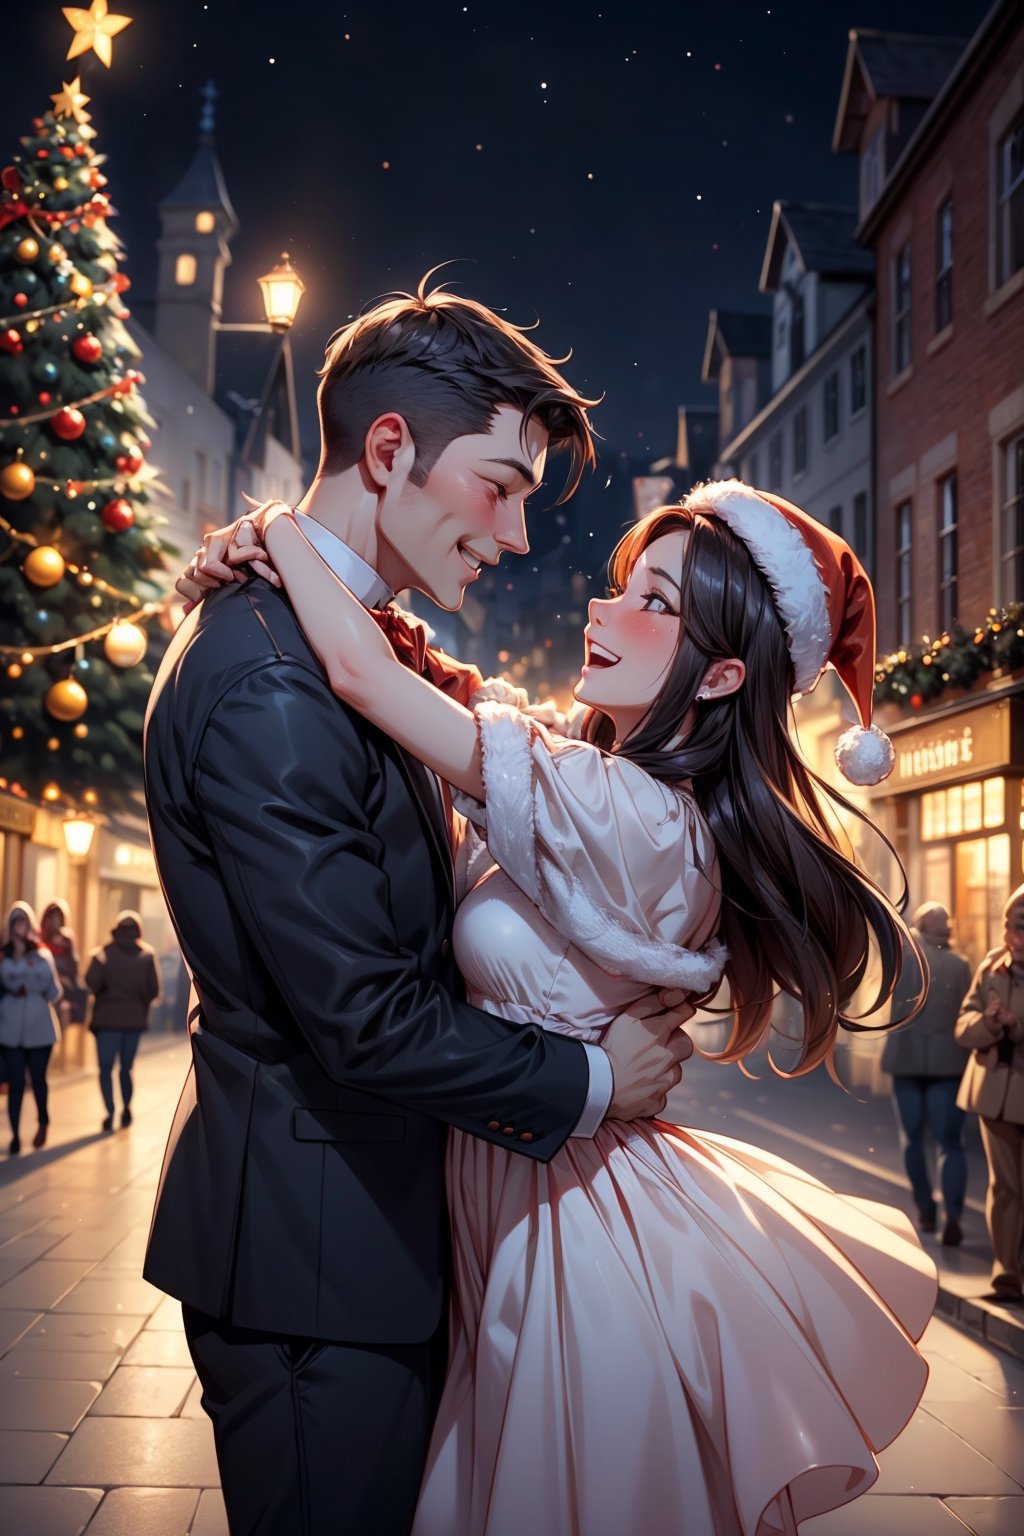 Two happy couples are dancing together wearing Classic outfit, in a town street, night, beautiful Christmas tree, beautiful decorated town for christmas, crowded are, romantic atmosphere,